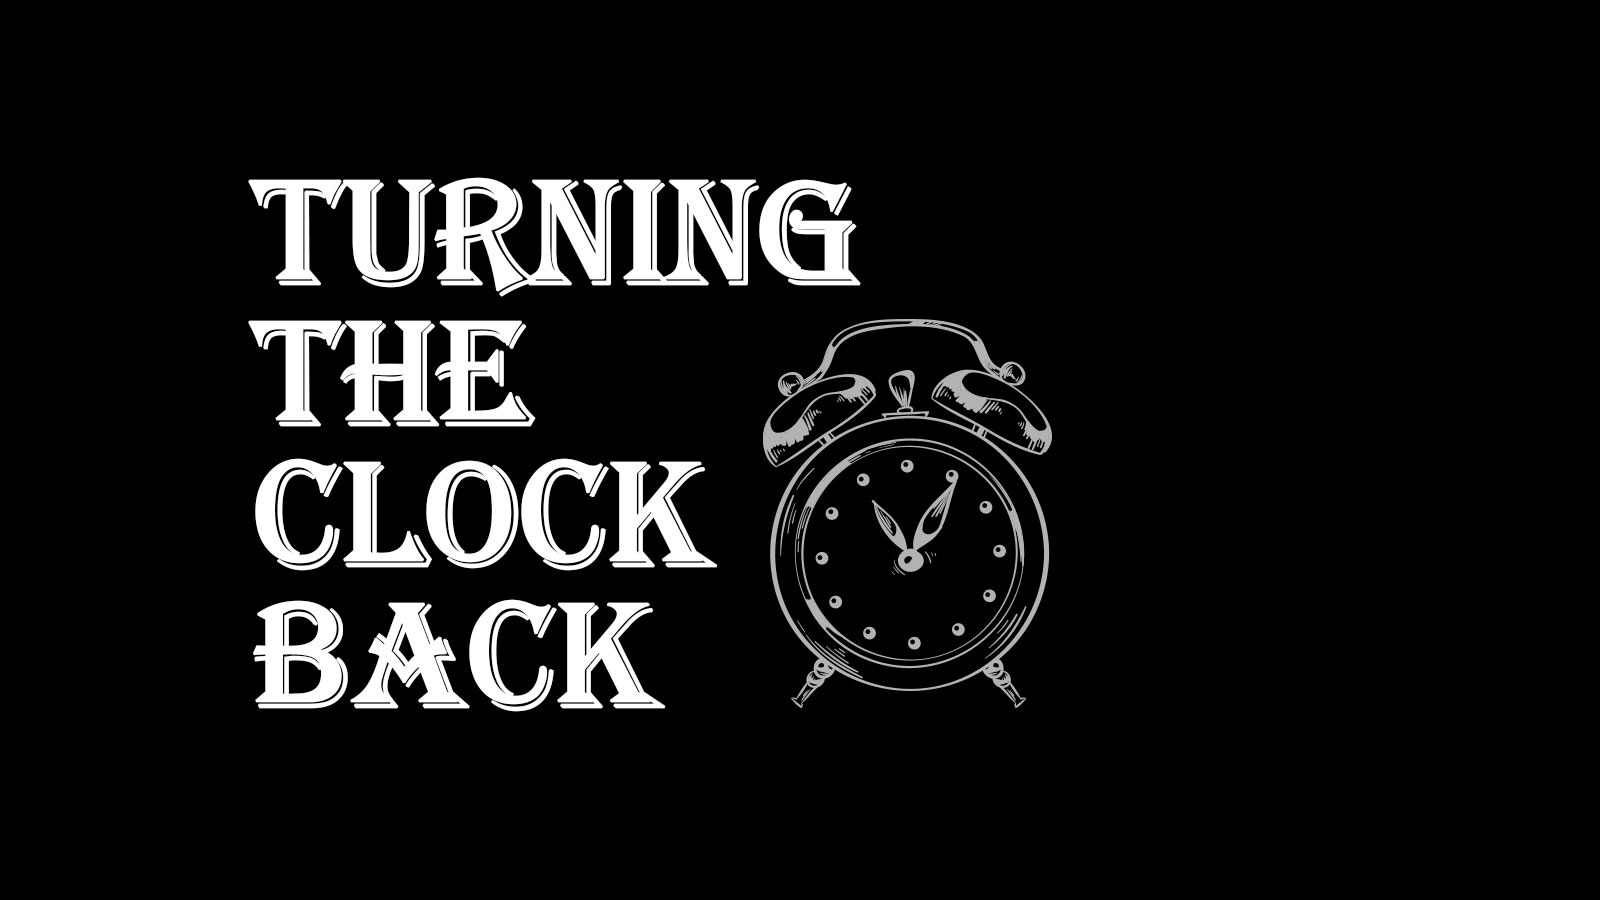 Turning the Clock Back James Ritchie (Snr) stone mason, goldminer